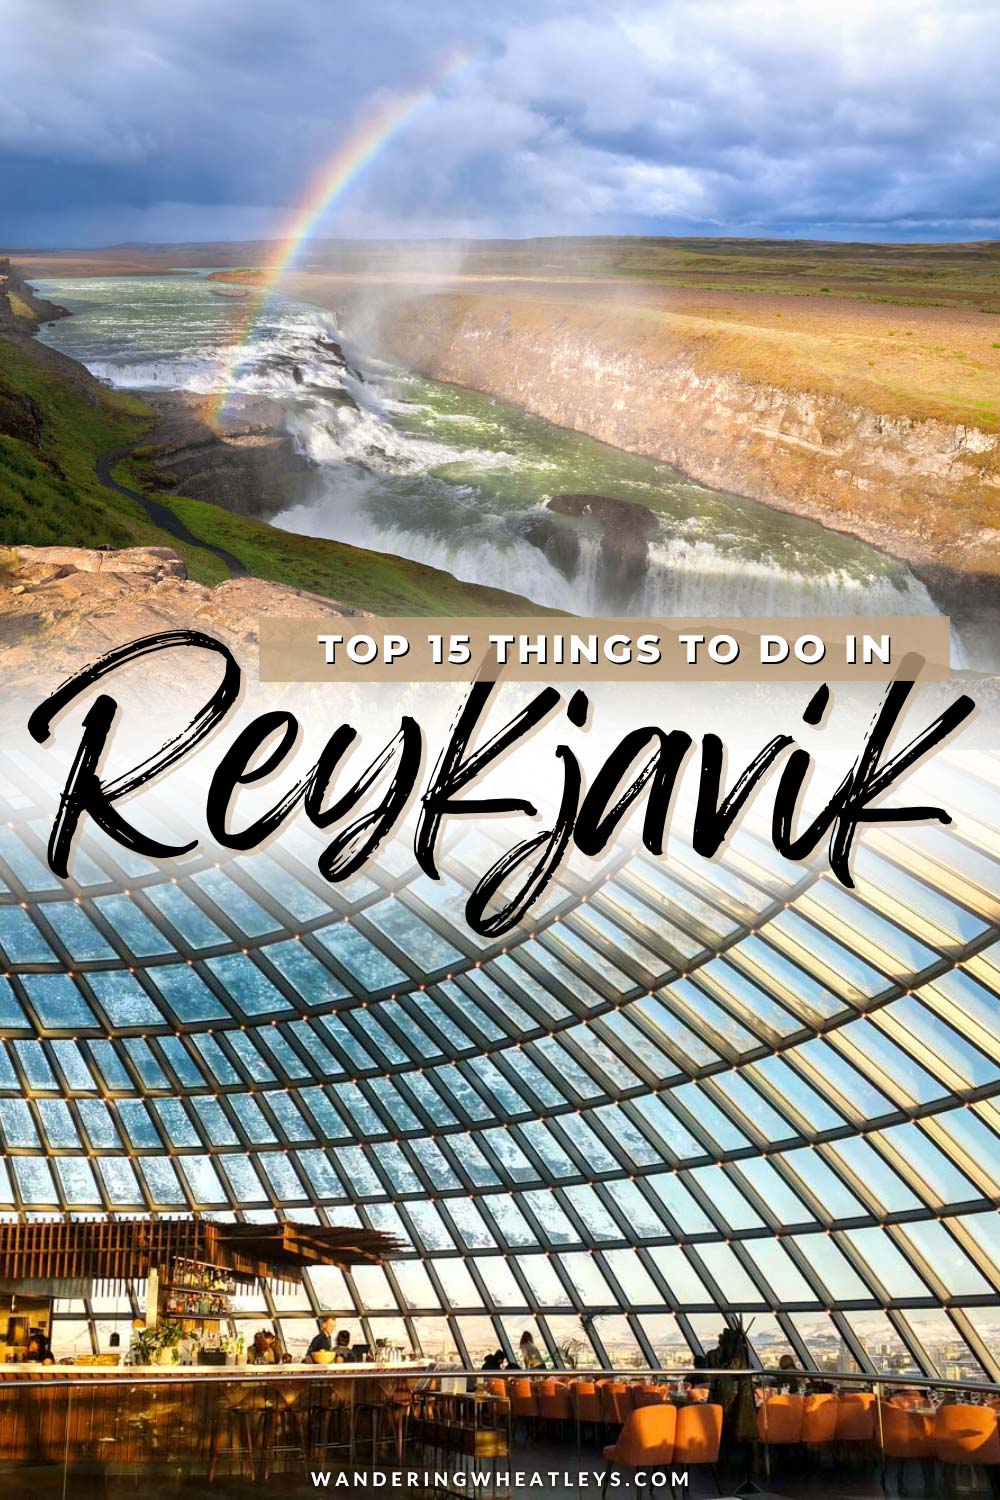 The Best Things to do in Reykjavik, Iceland